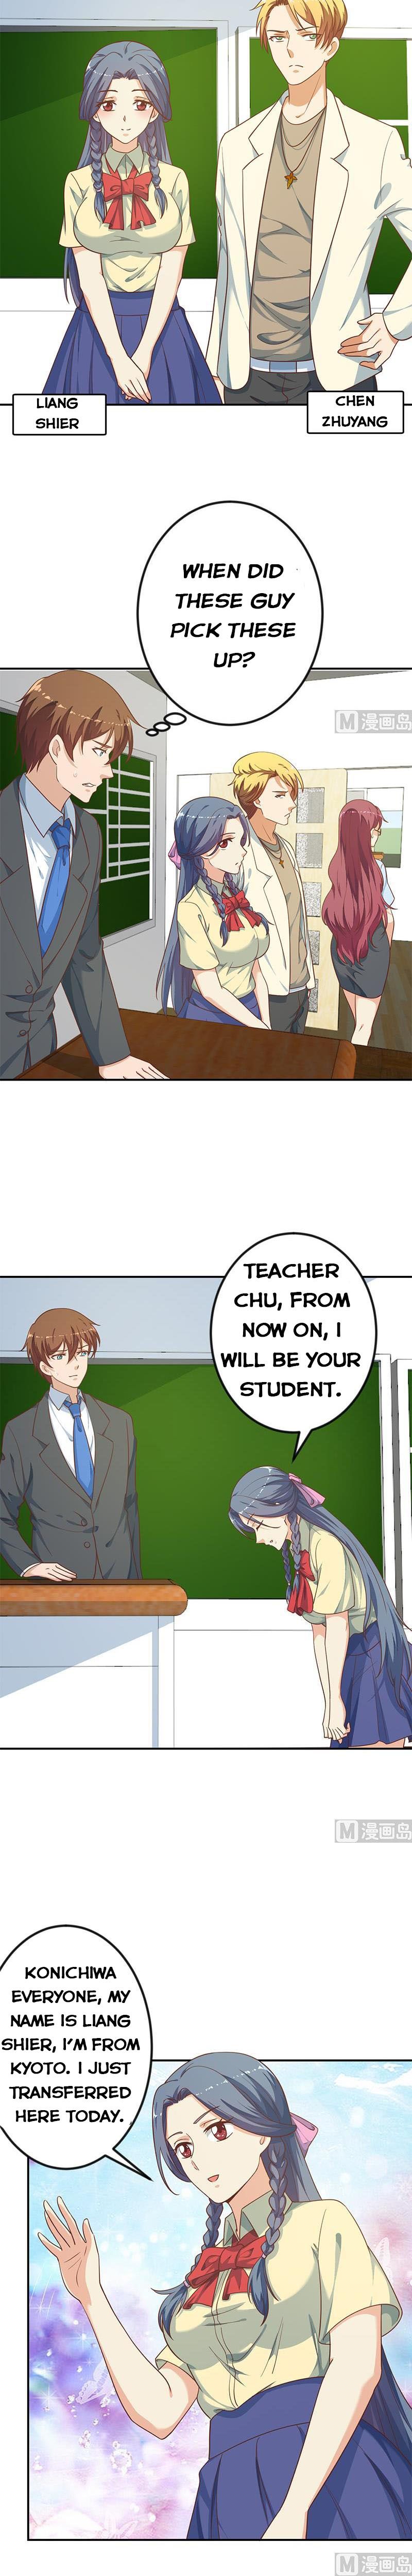 Cultivation Return on Campus Chapter 135 page 6